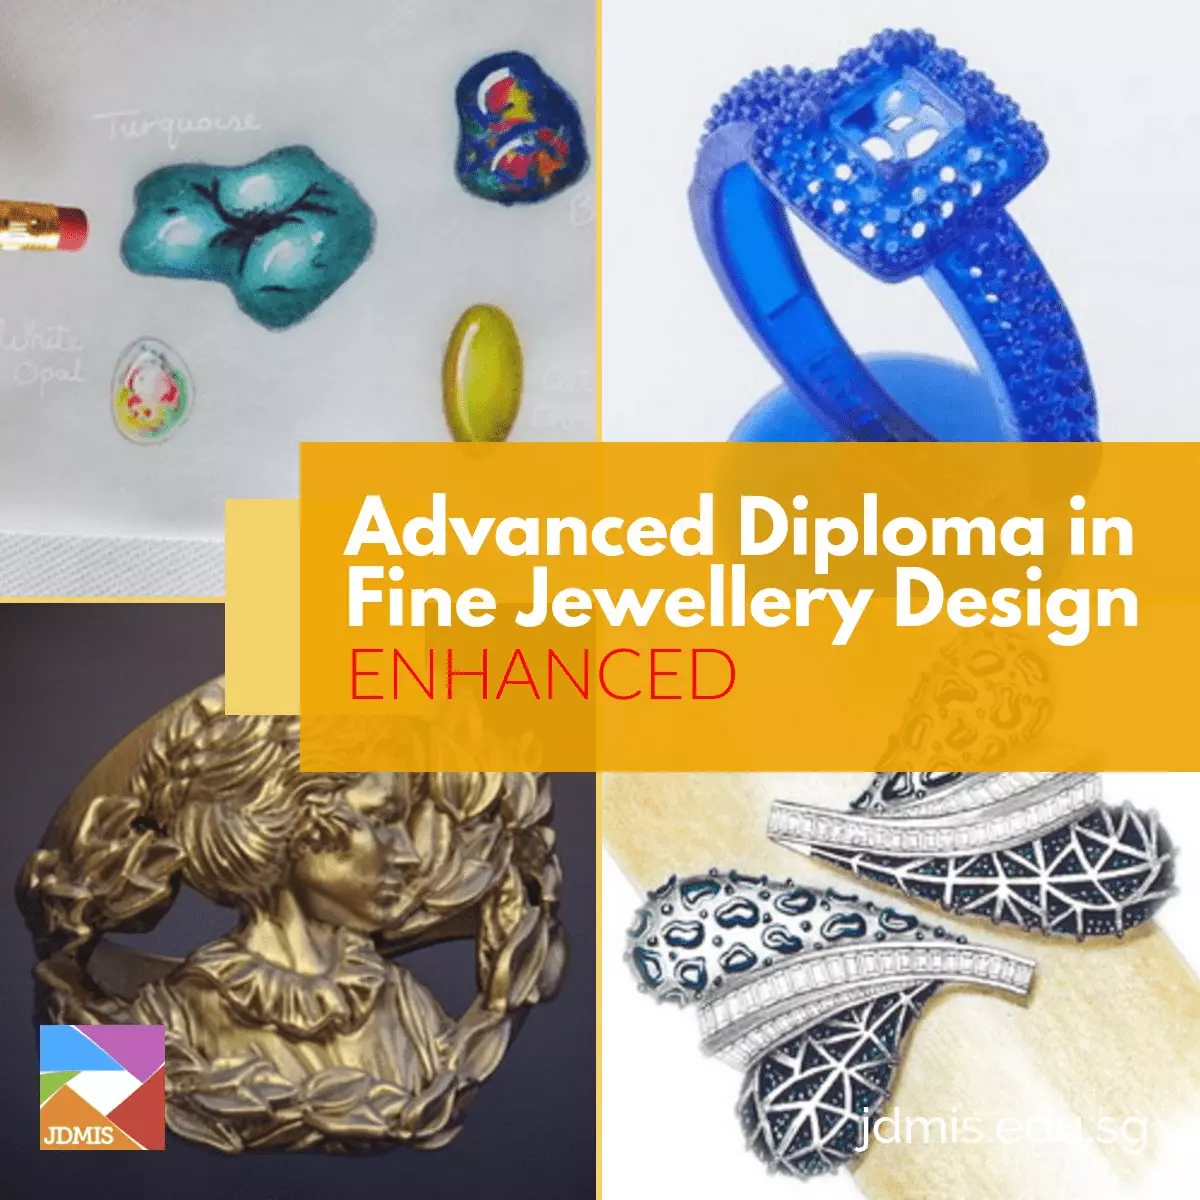 Trained jewellery designers need to understand their customers, and produce contemporary, fashionable designs, but also need to be able to confidently communicate...